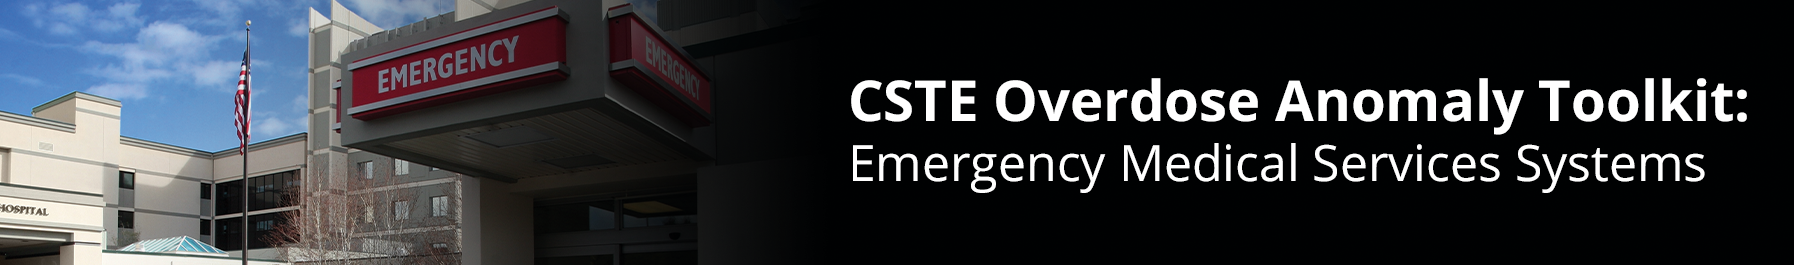 CSTE Overdose Anomaly Toolkit: Emergency Medical Service Systems